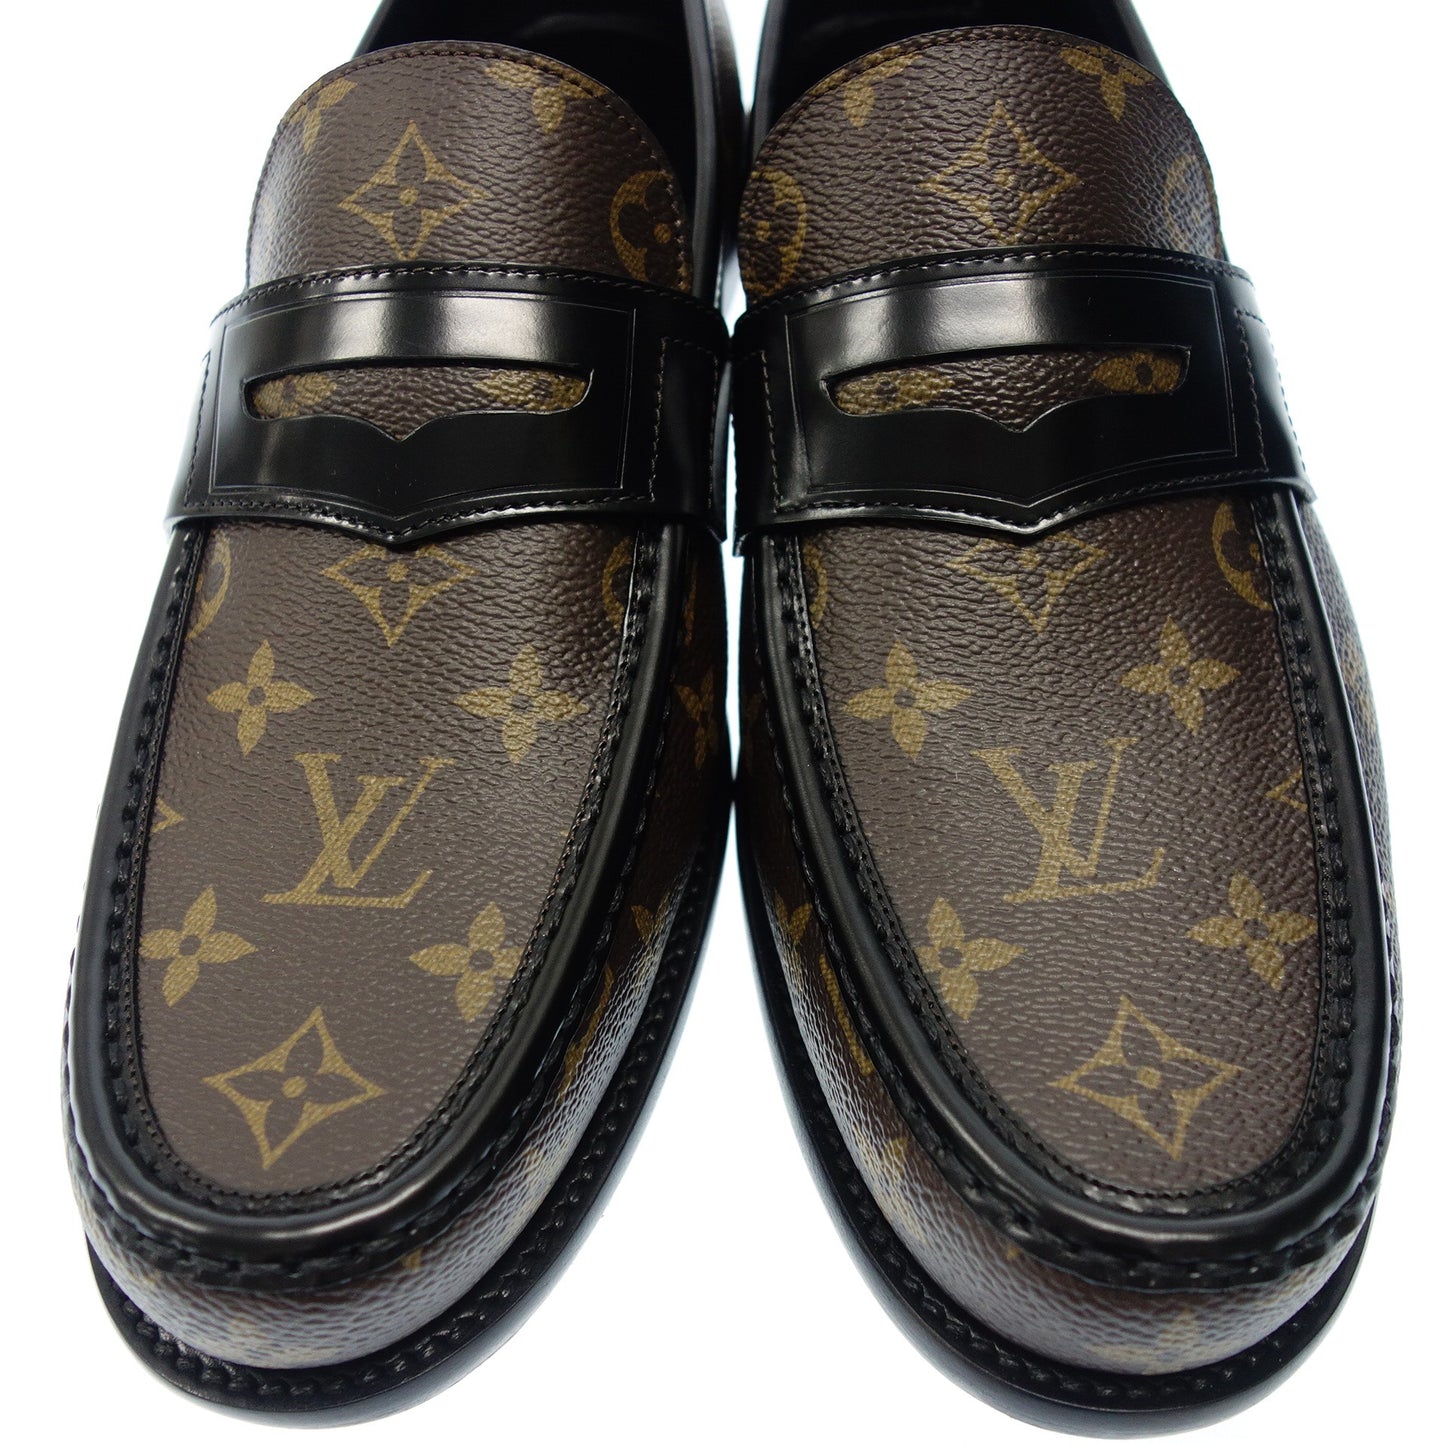 Like new◆Louis Vuitton Leather Loafers NBA Monogram FA0231 Men's Size 10 Brown LOUIS VUITTON [AFC23] 